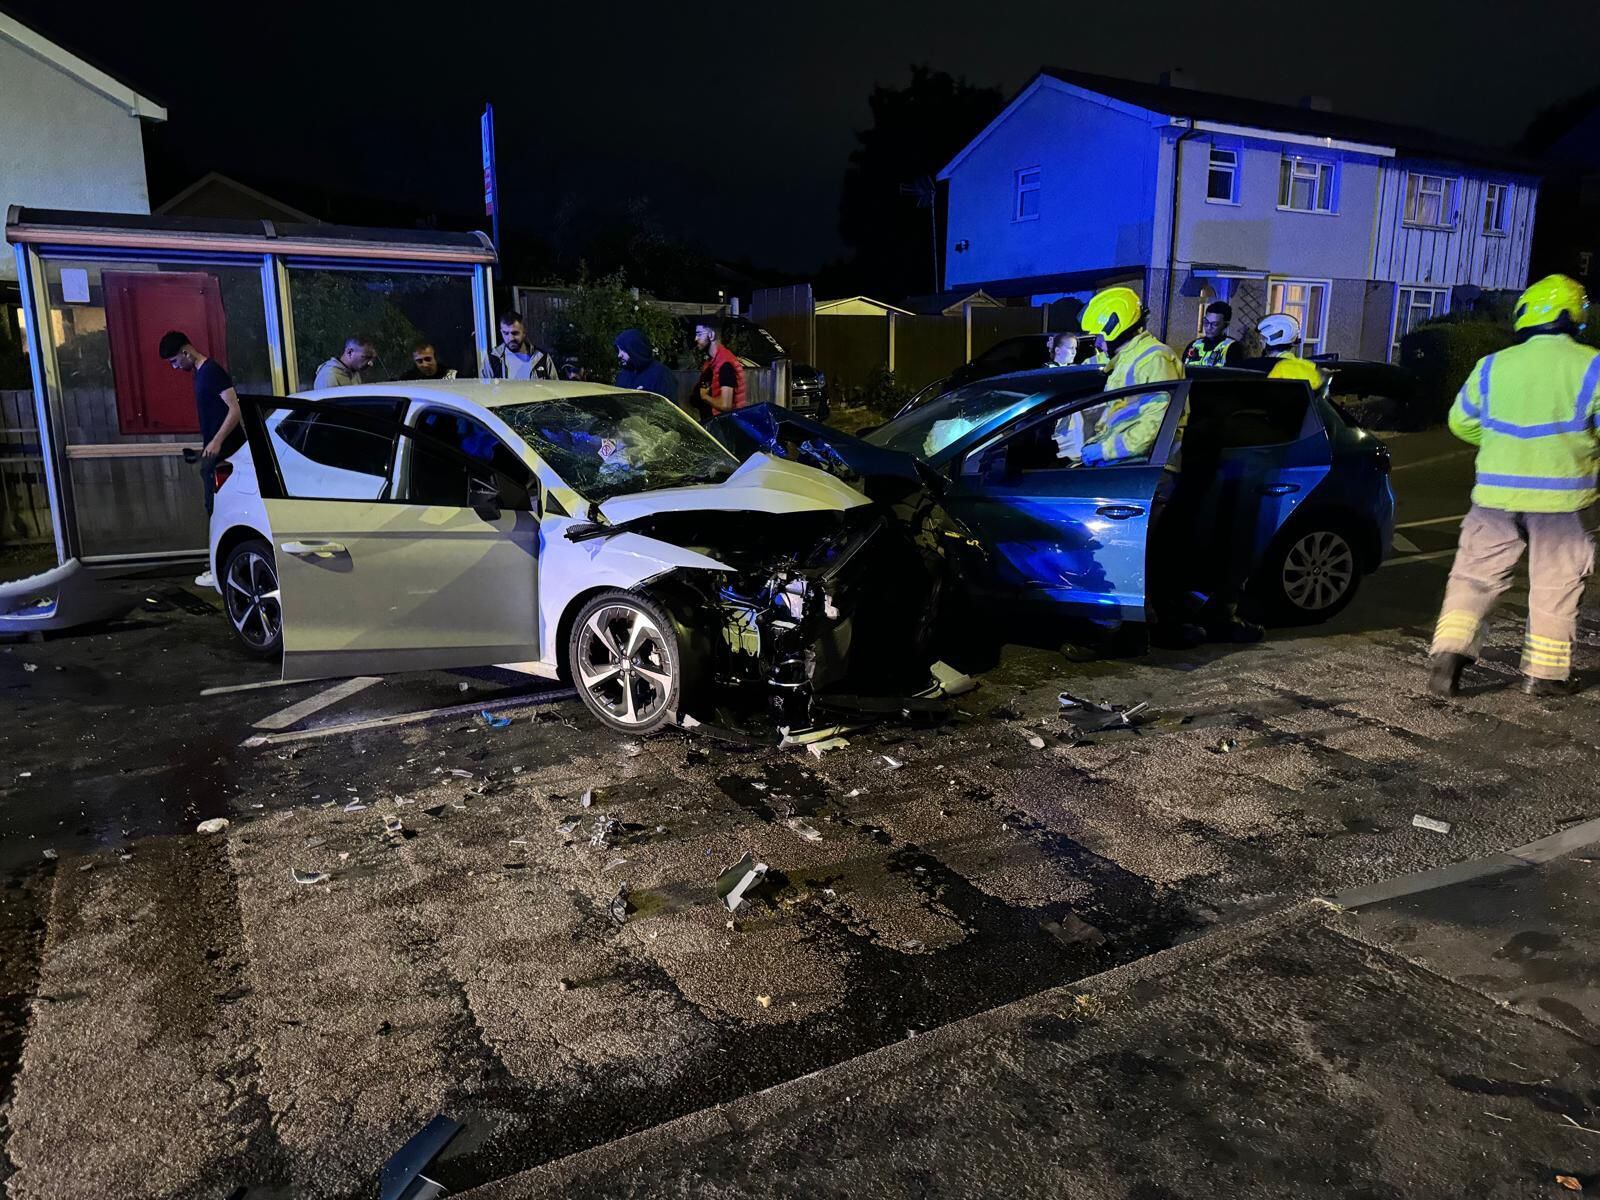 Two injured in Dudley crash as two cars collide near bus stop & police appeal for information